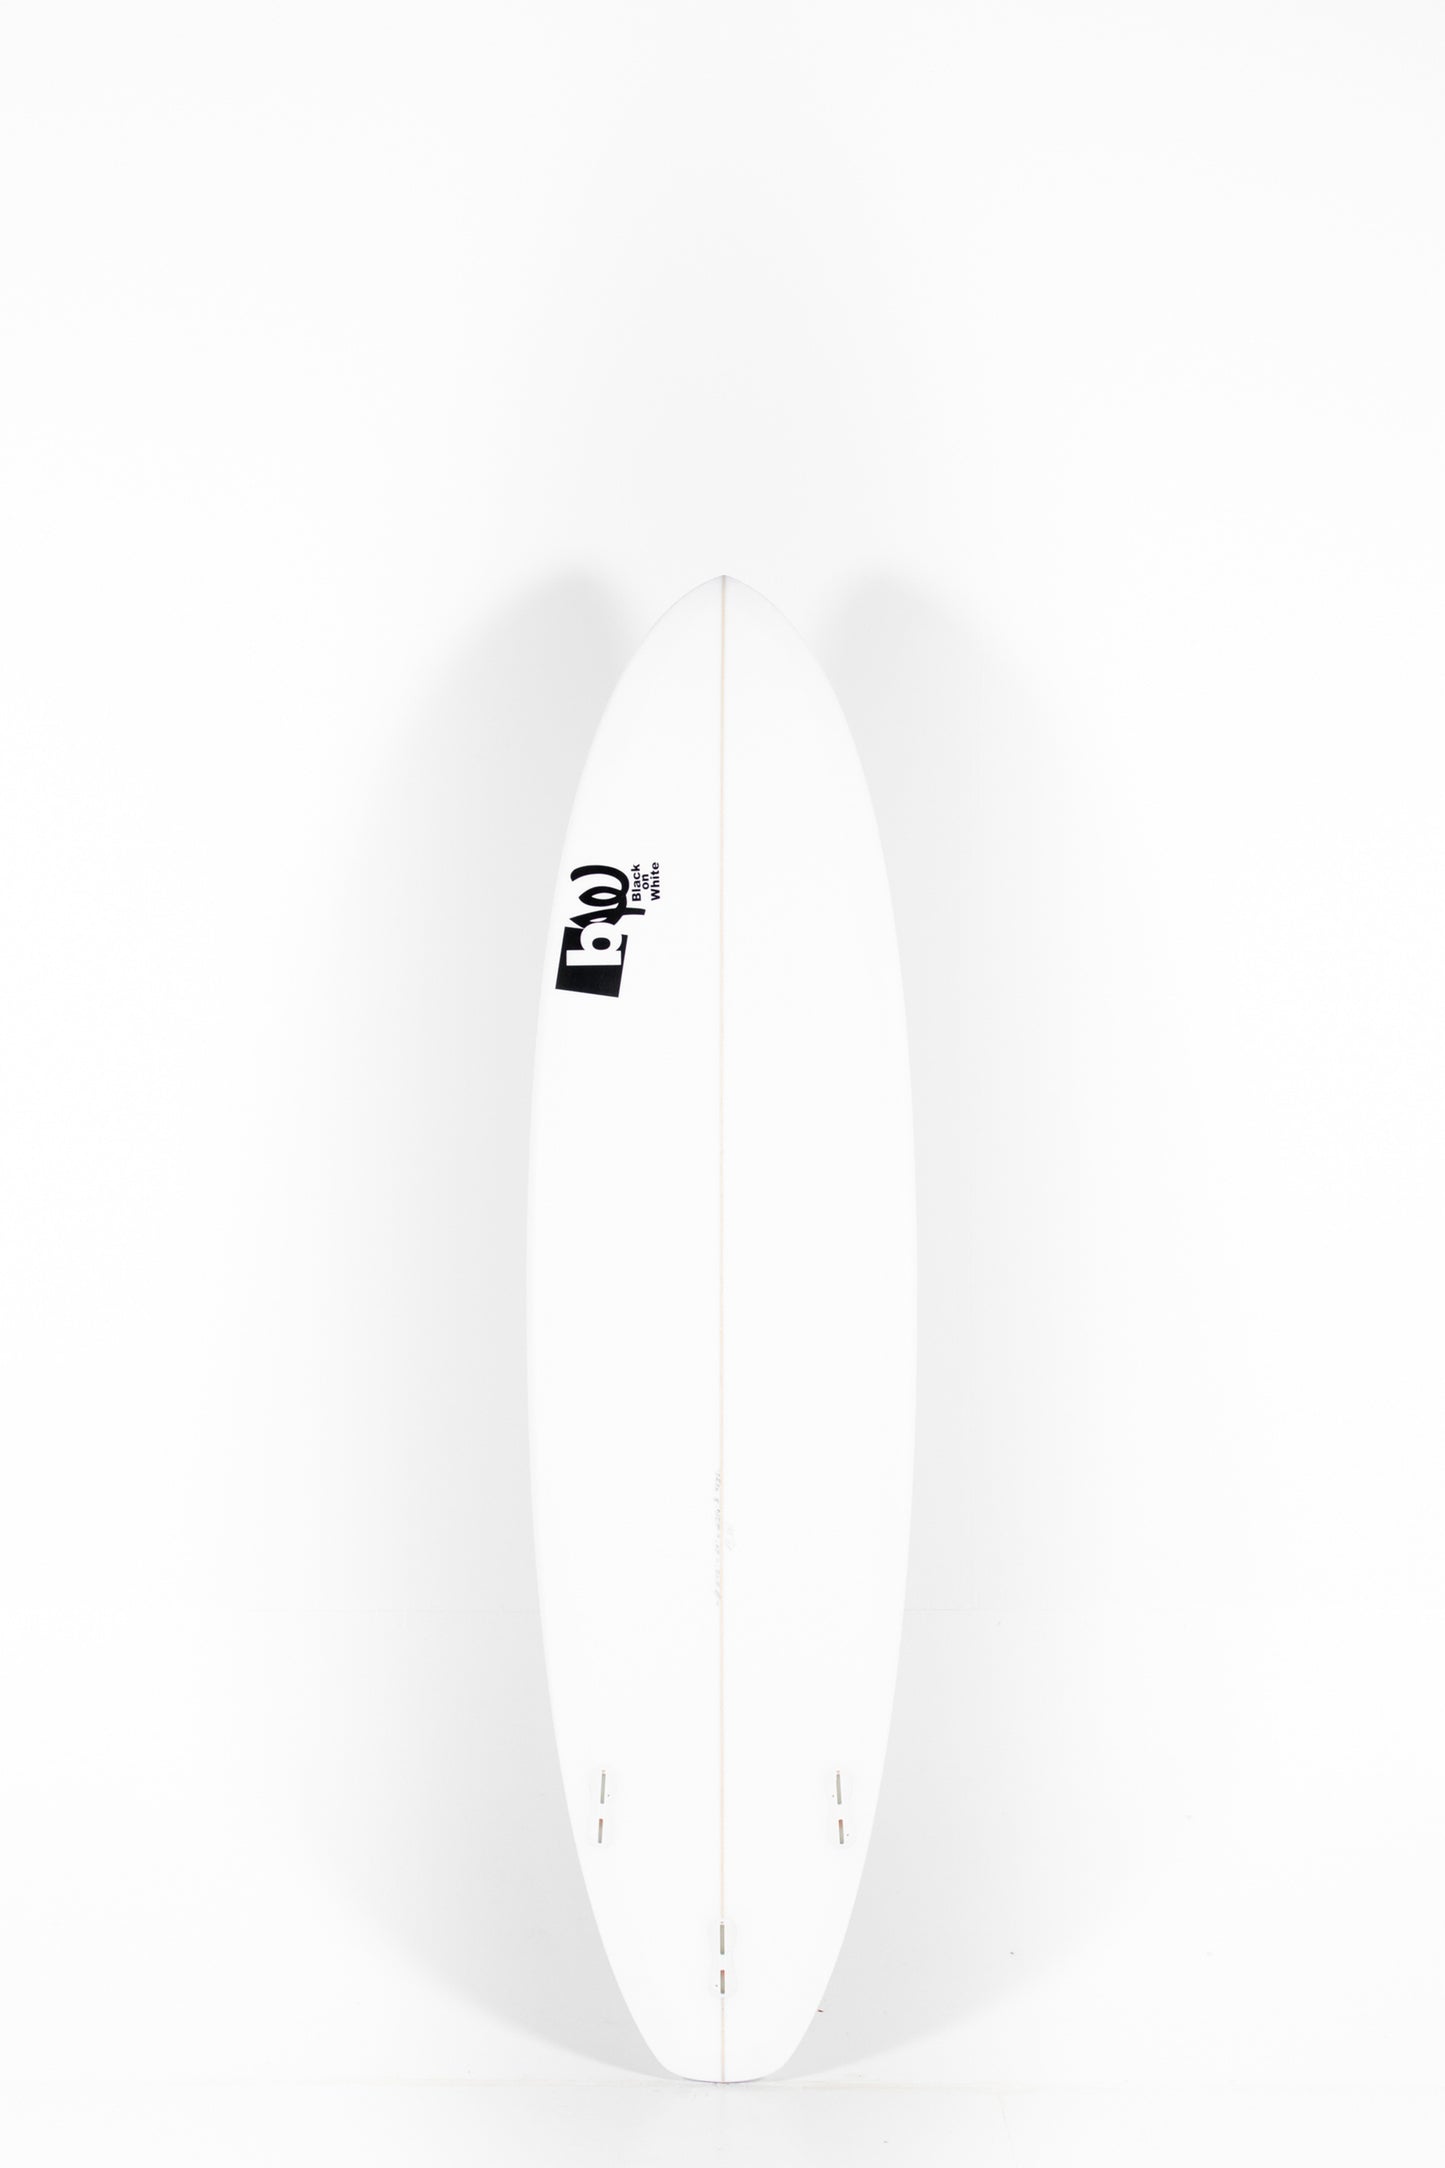 BW SURFBOARDS - BW SURFBOARDS Evolutivo 6'10" x 21 x 2 3/4 x 47.3L. at PUKAS SURF SHOP